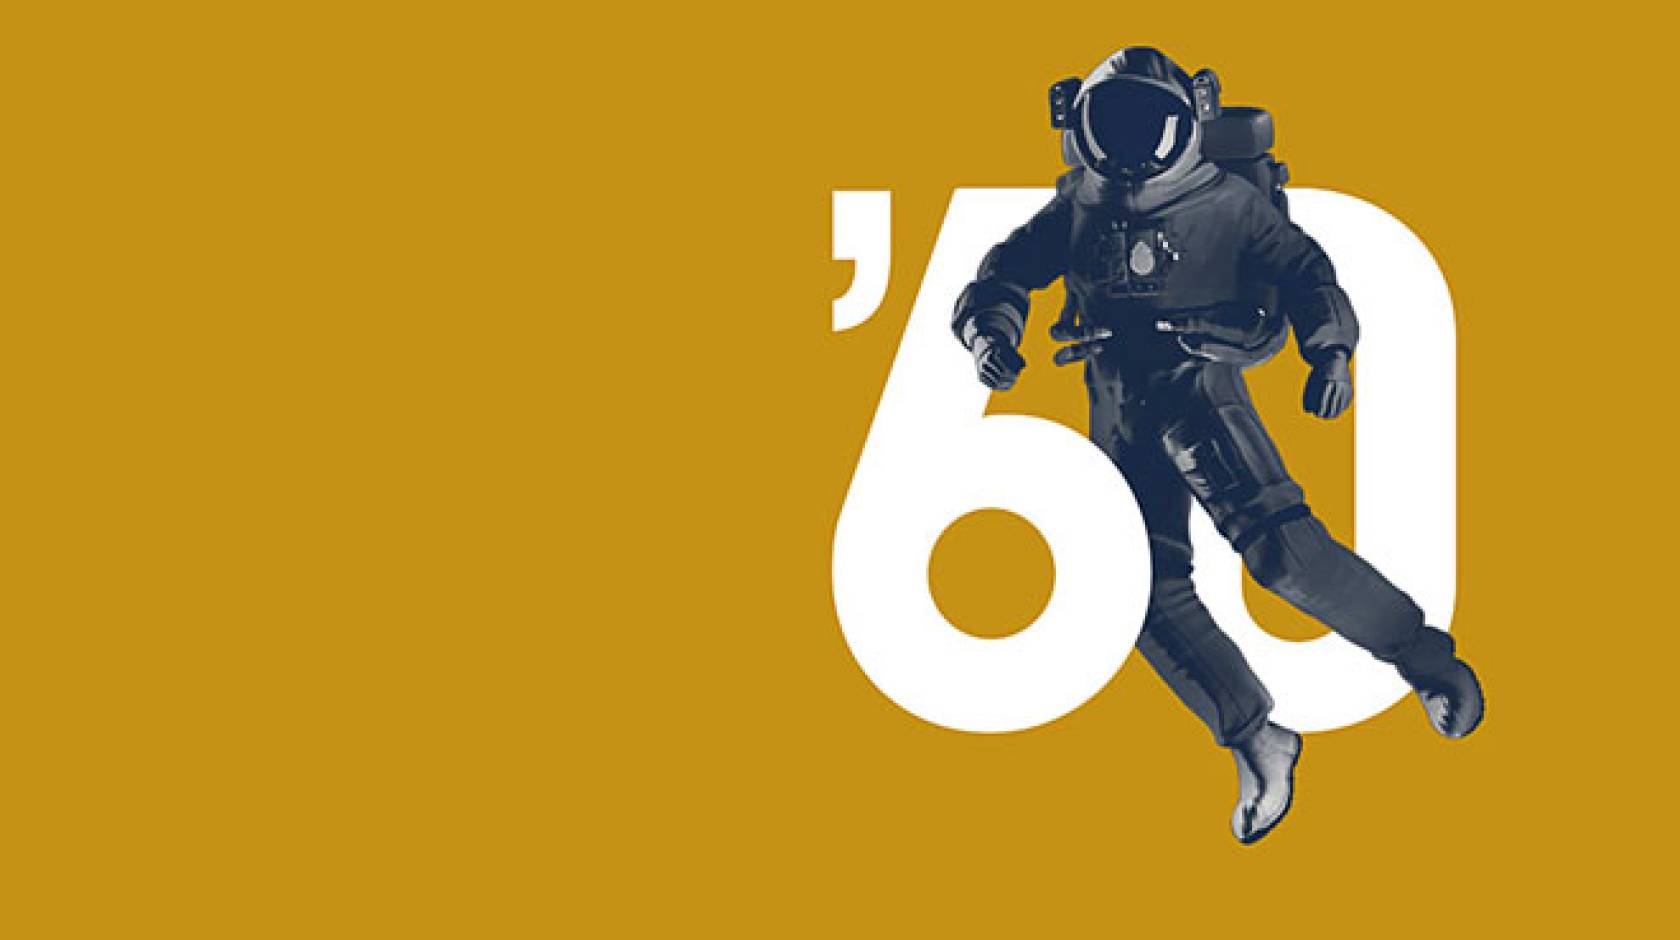 Astronaut on gold background with number 60